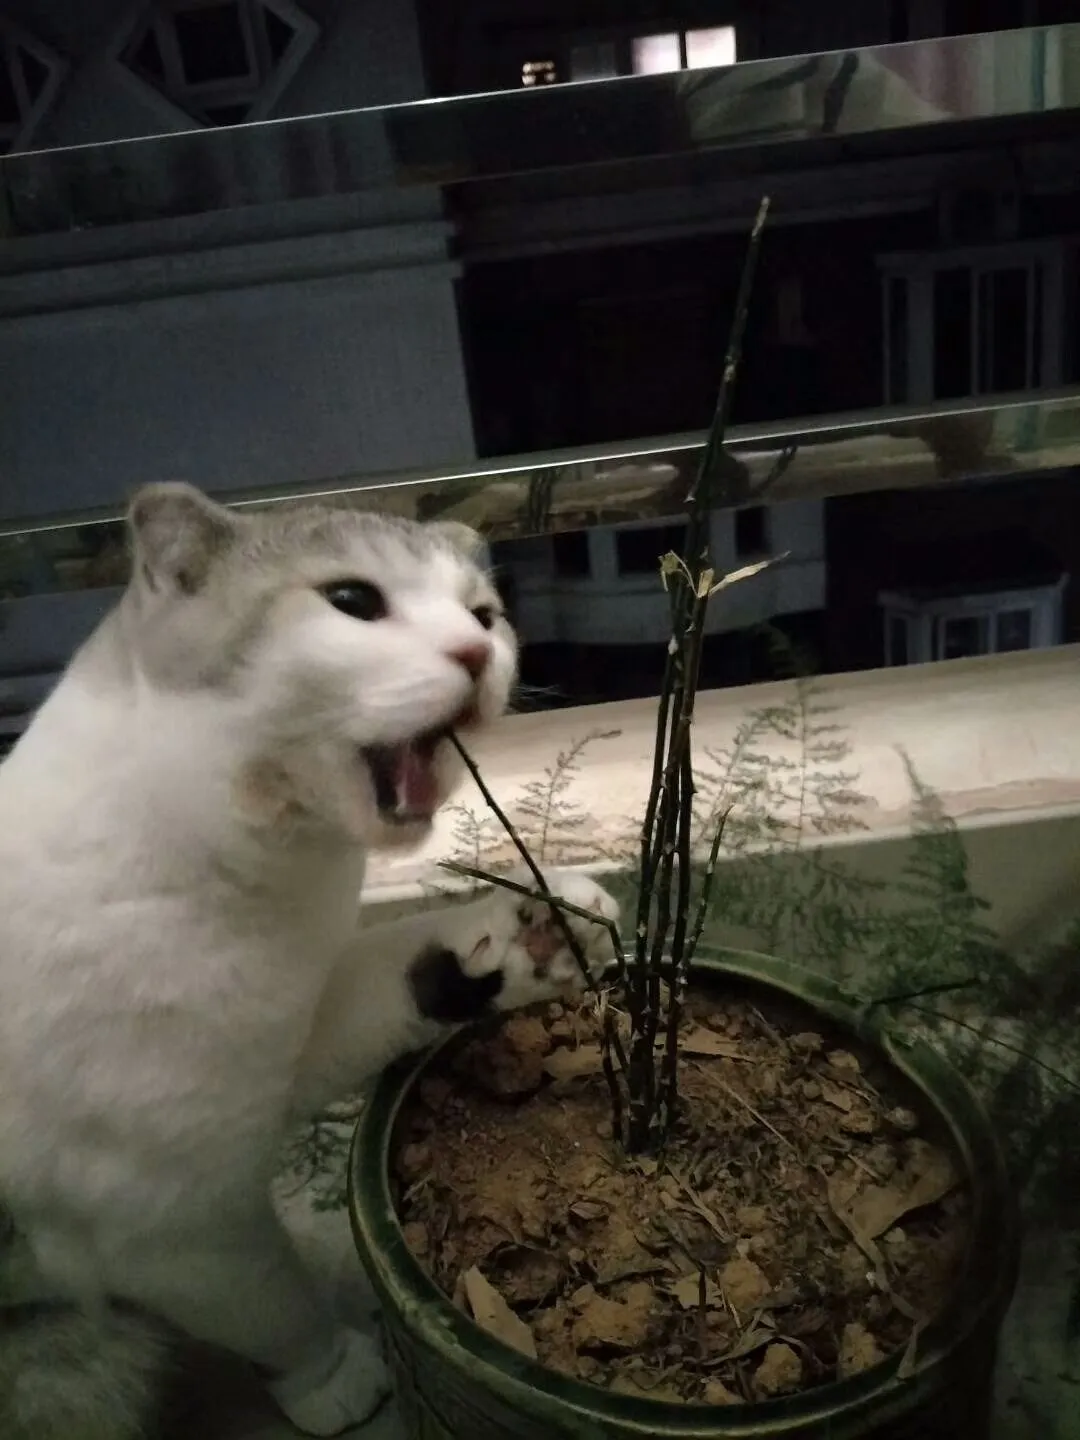 Is an Asparagus Fern Poisonous to Cats?